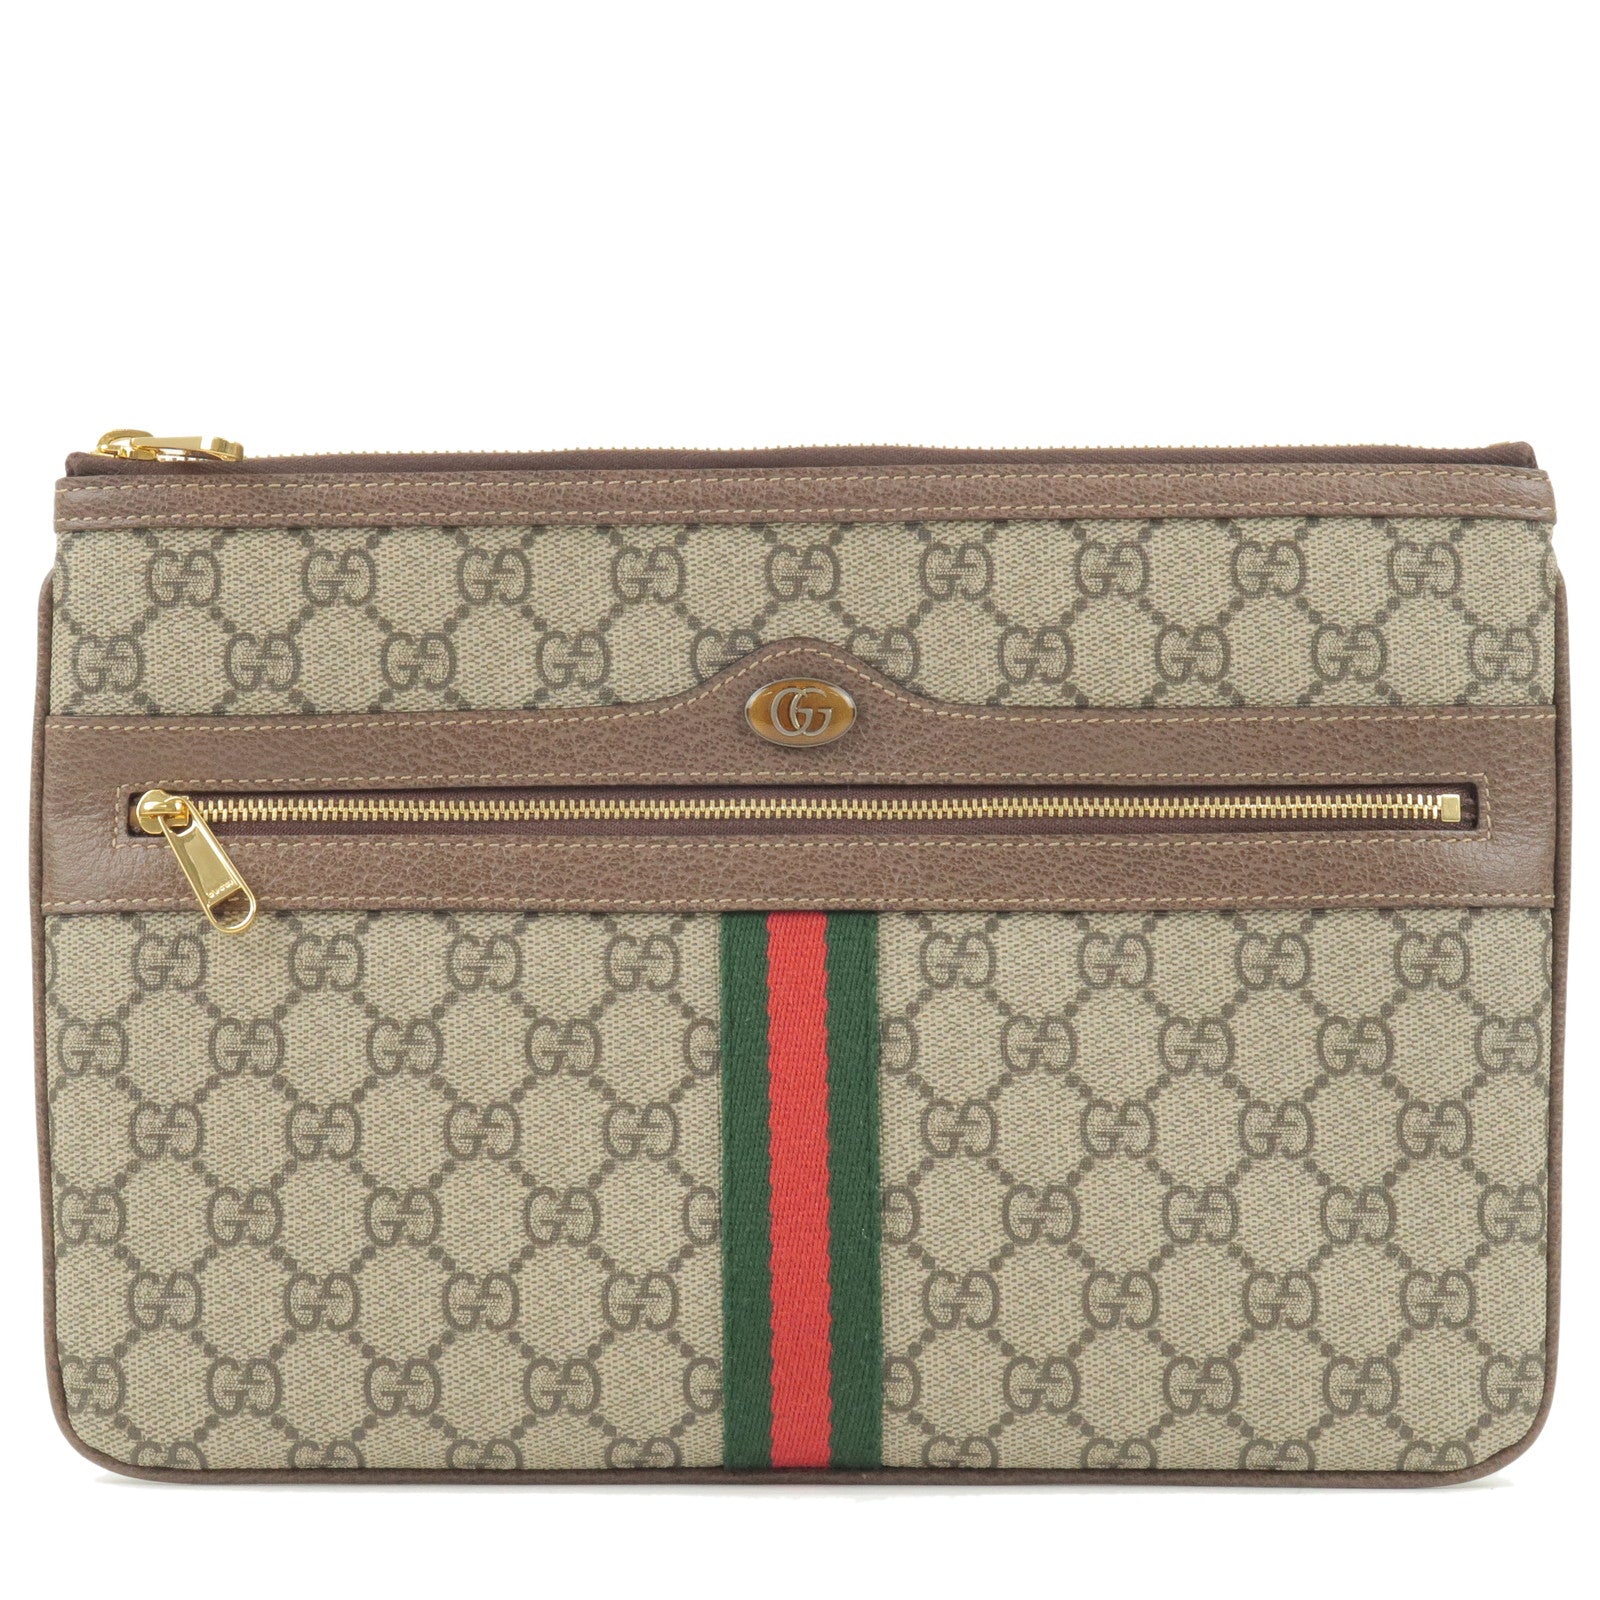 GUCCI-Sherry-Ophidia-GG-Supreme-Leather-Clutch-Bag-Beige-517551